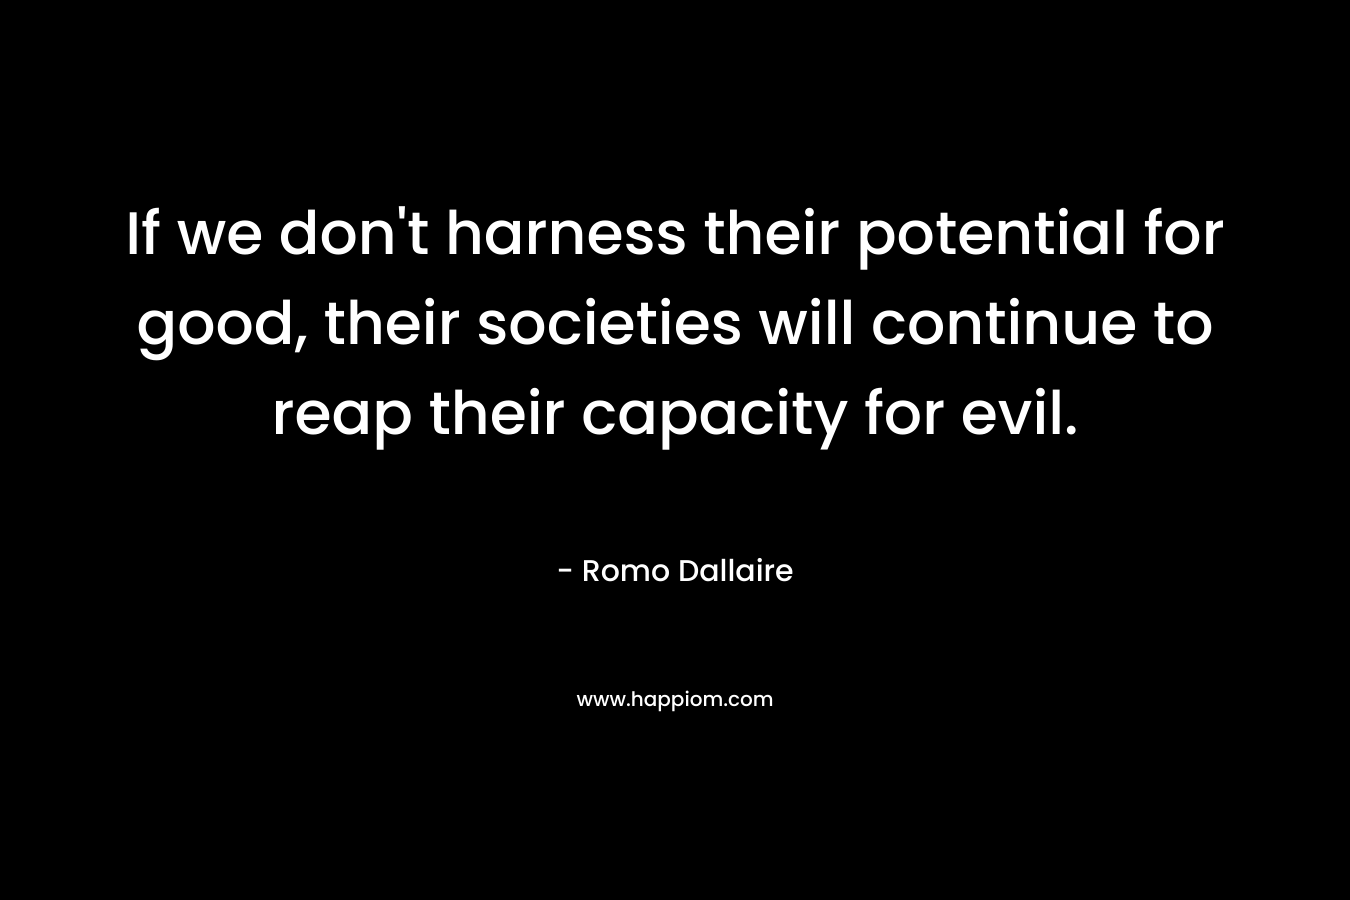 If we don’t harness their potential for good, their societies will continue to reap their capacity for evil. – Romo Dallaire